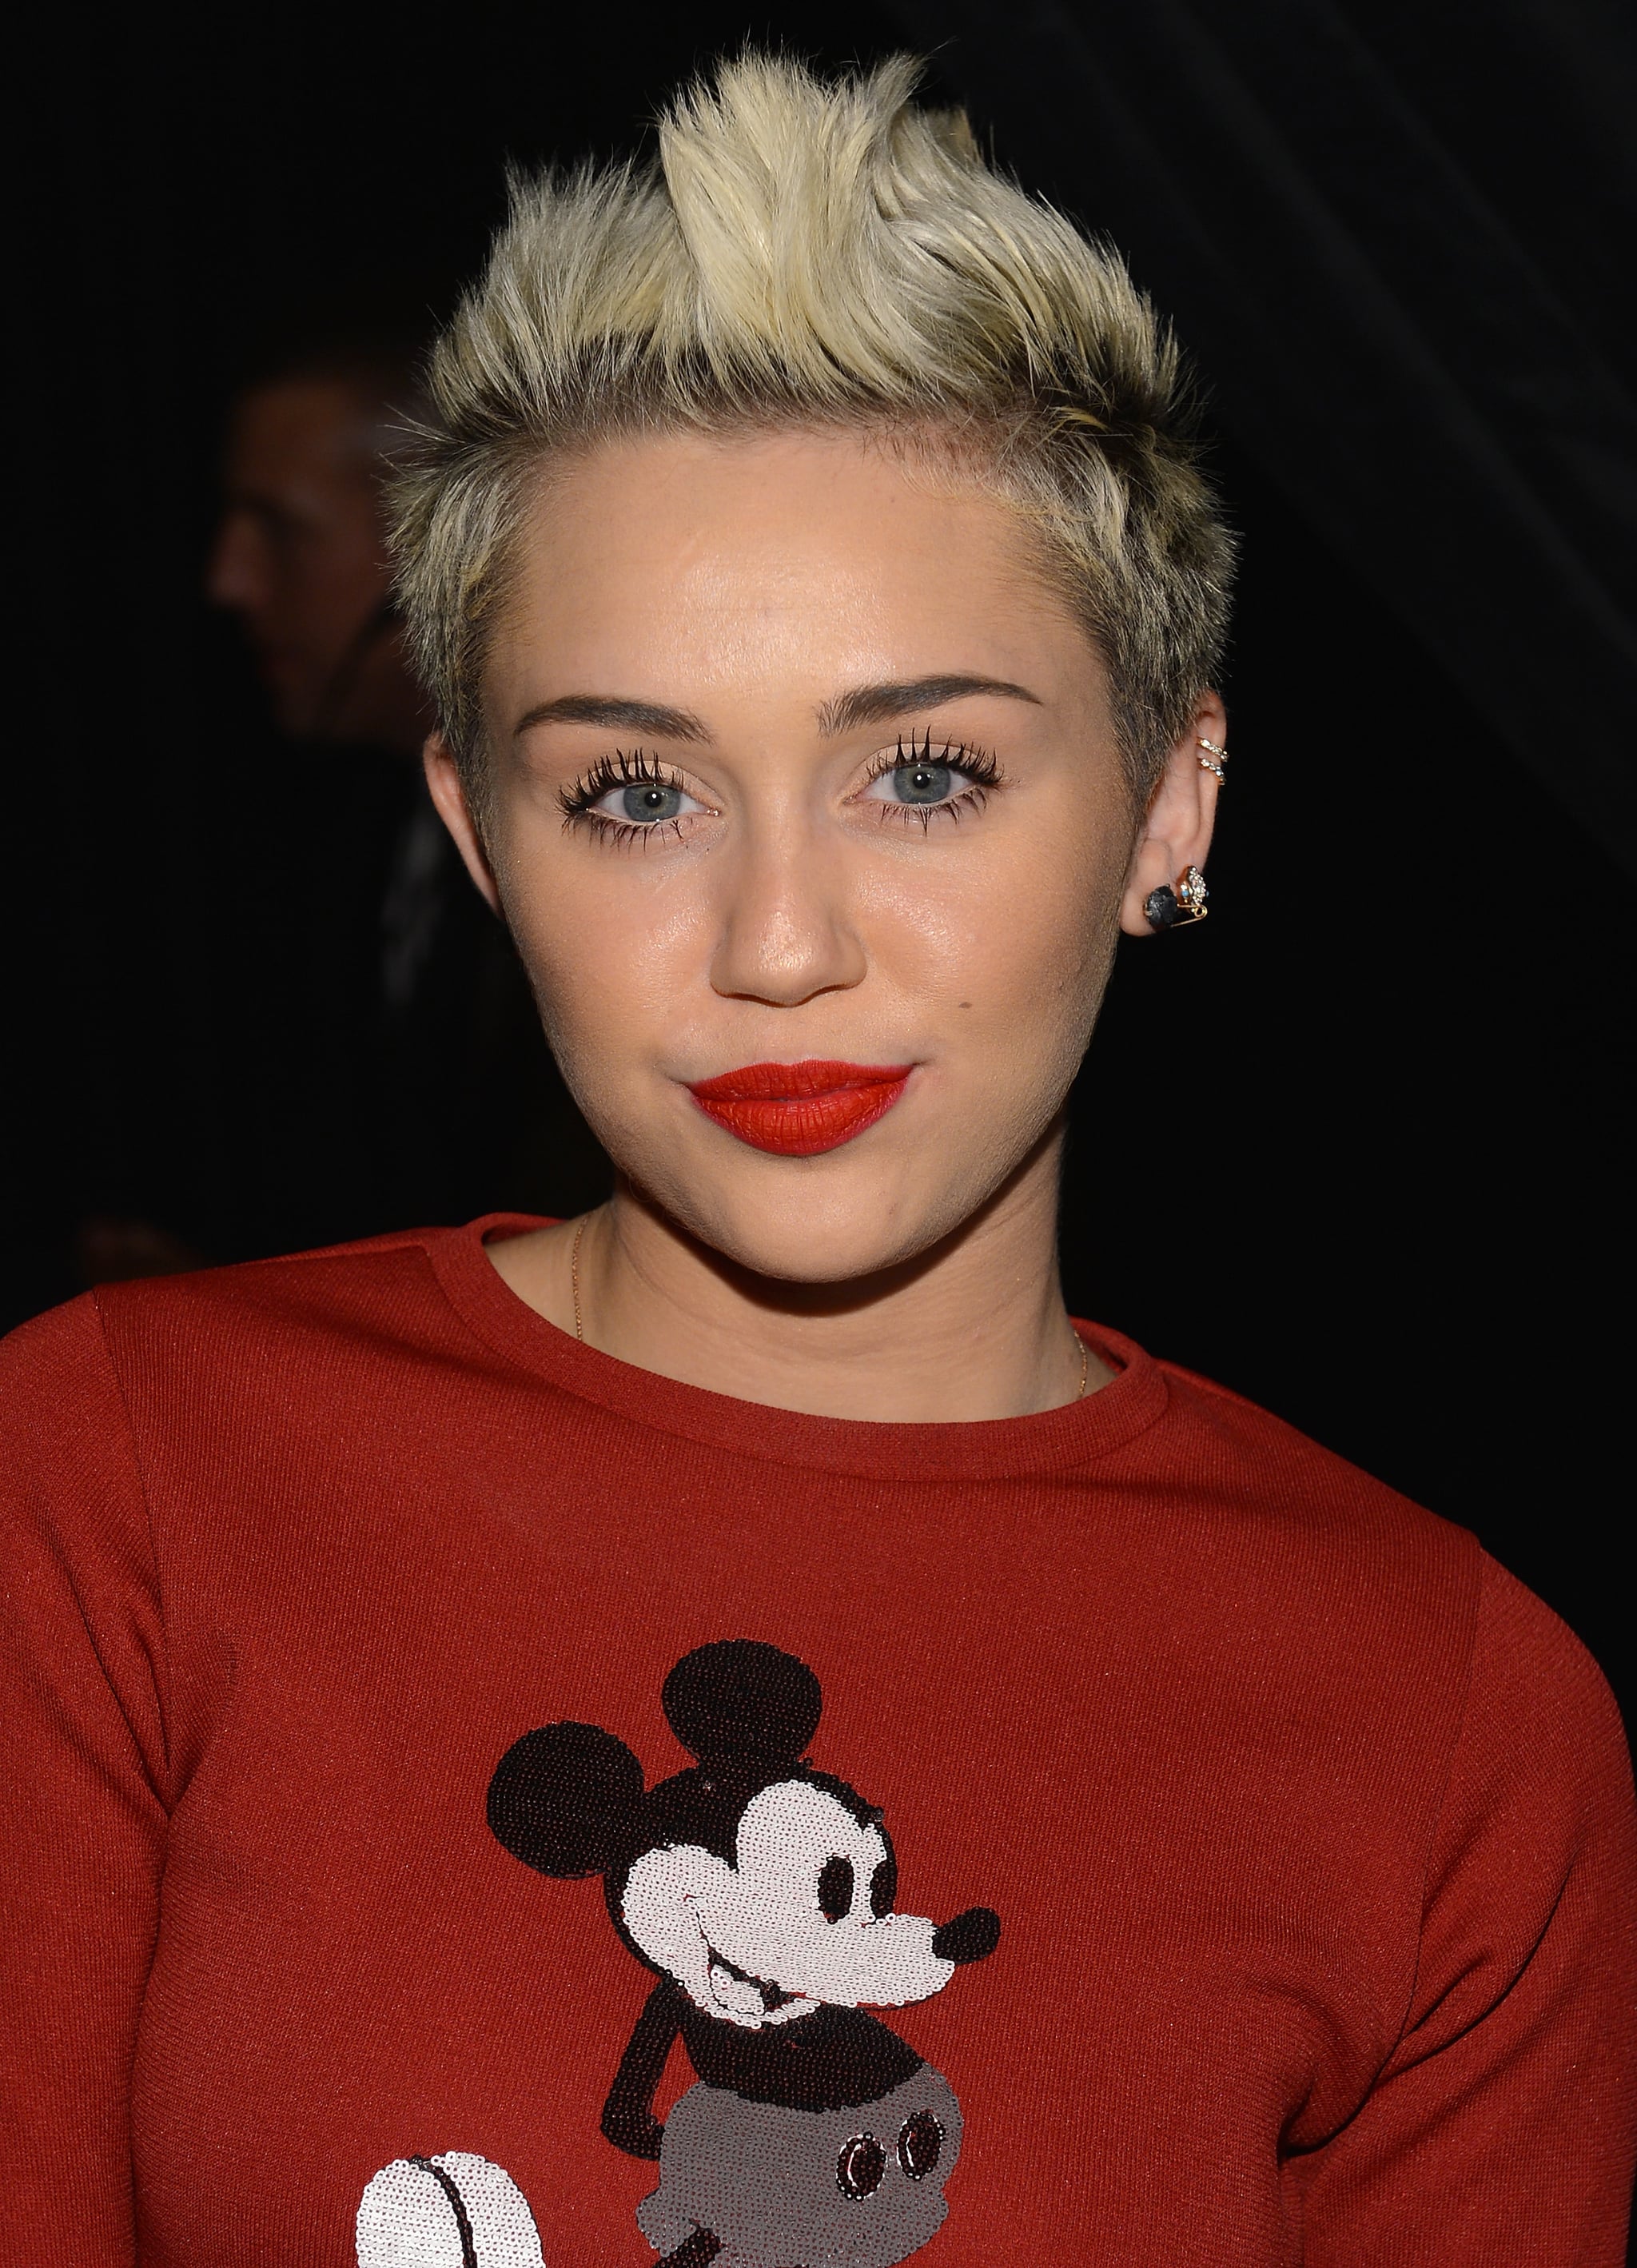 Miley Cyrus Cut Her Own Bangs In Self-Isolation | POPSUGAR Beauty UK